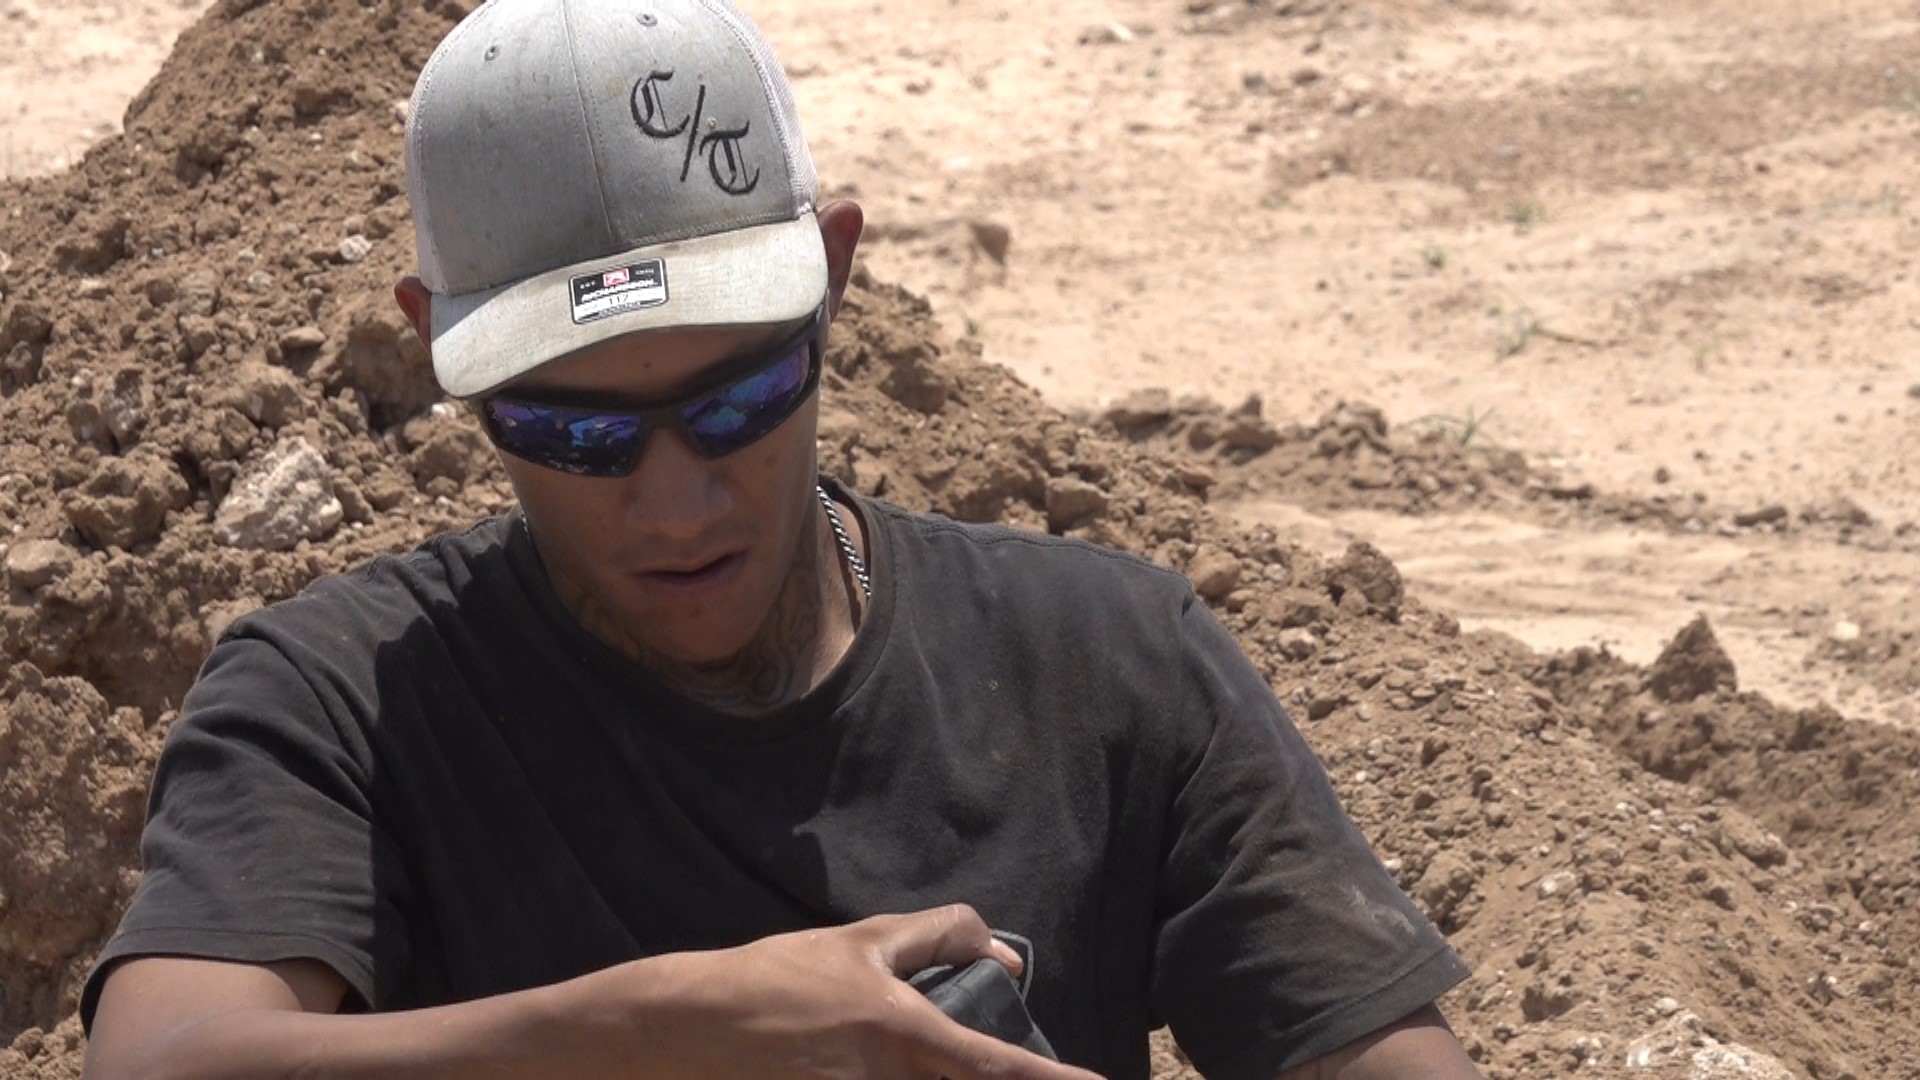 West Texans talk about how they stay safe working in intense heat